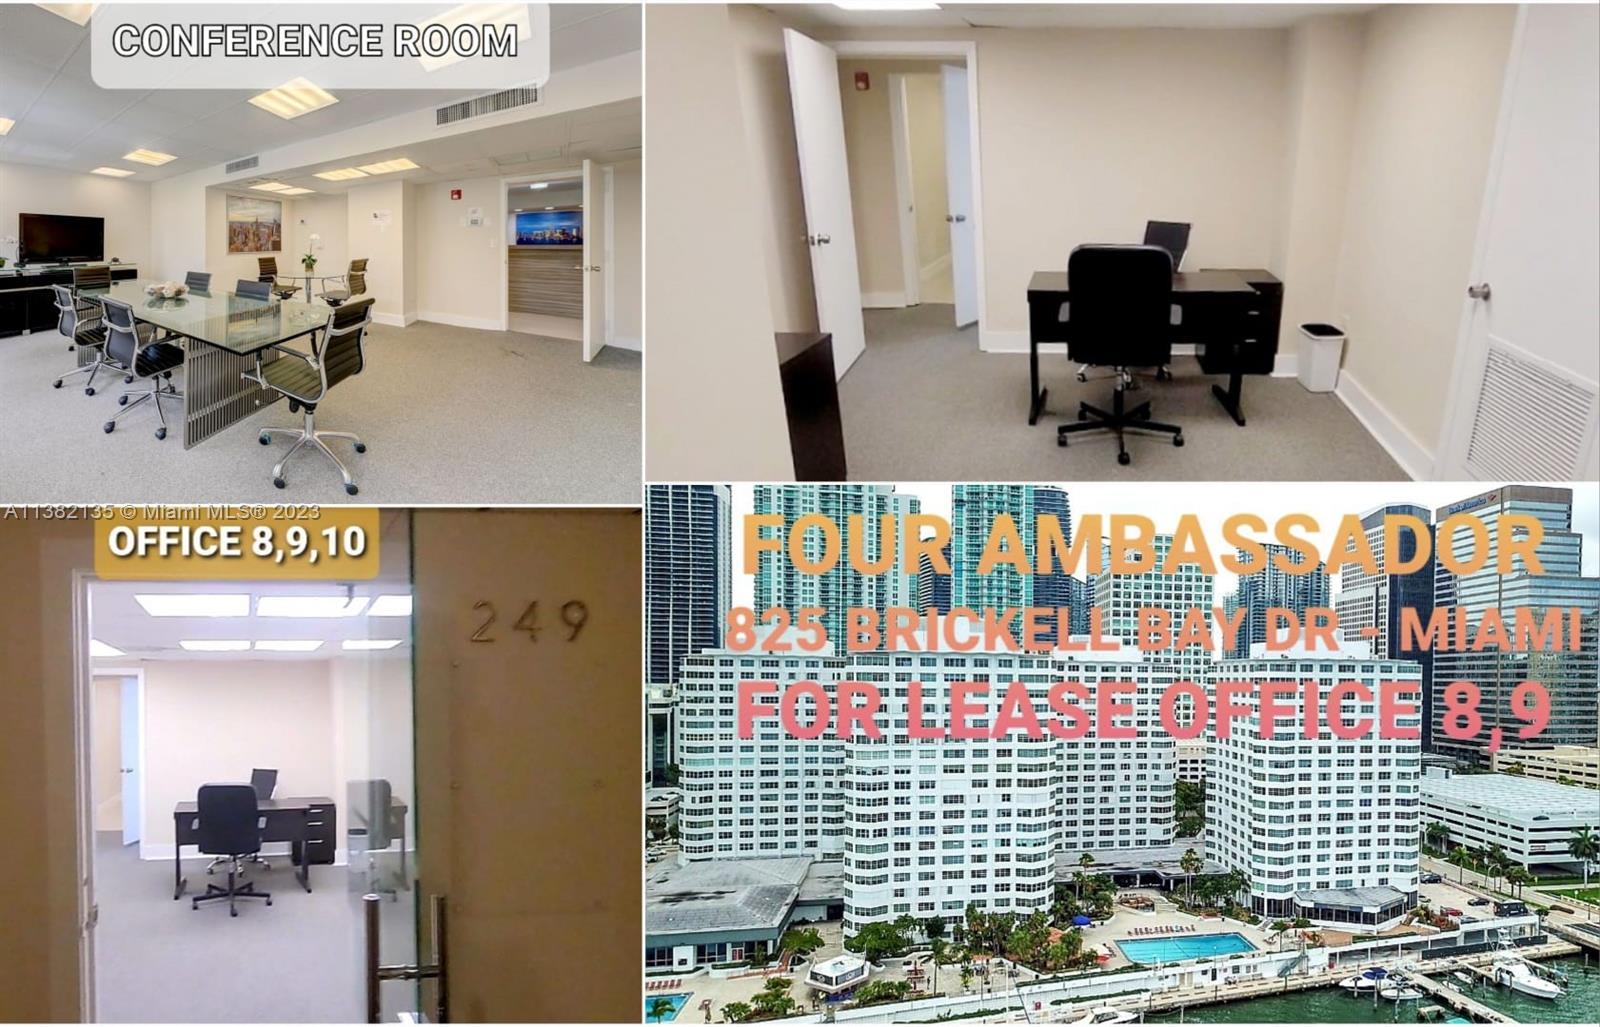 825 Brickell Bay Dr  246-8, 9 & 10, Miami,  for leased, InCom Real Estate - Sample Office 